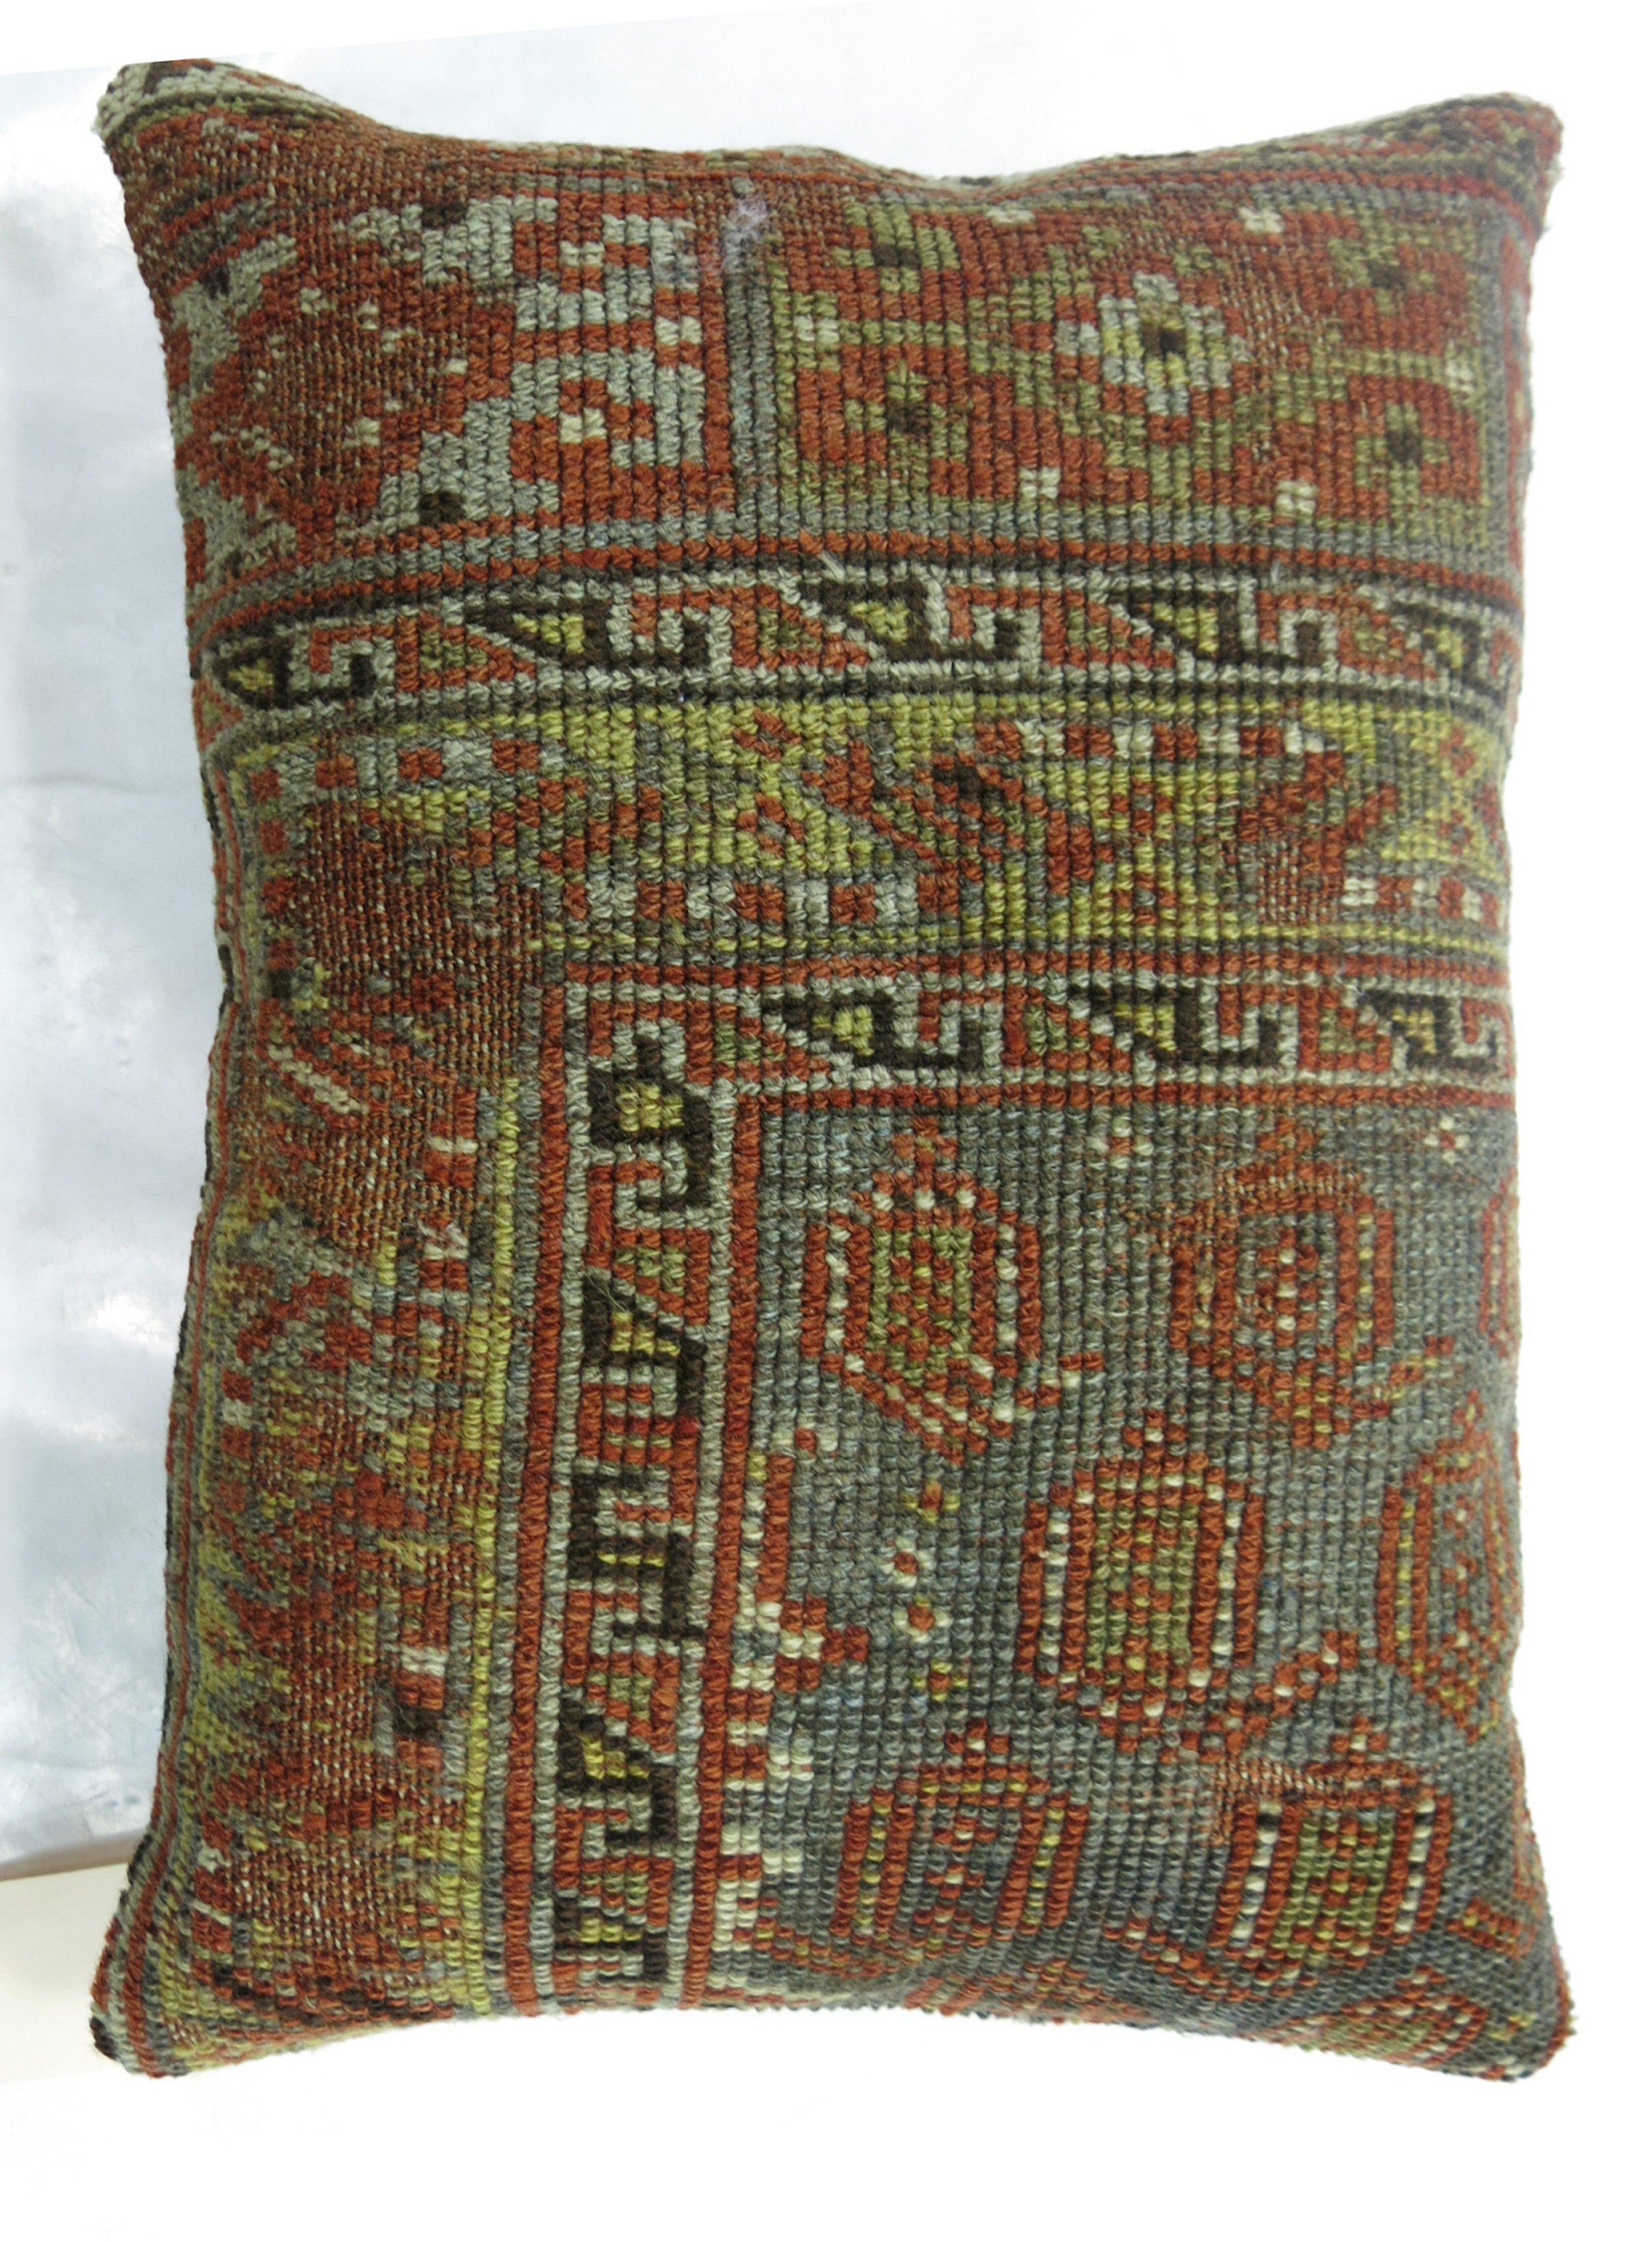 Blue Malayer Paisley Rug Pillow In Excellent Condition For Sale In New York, NY